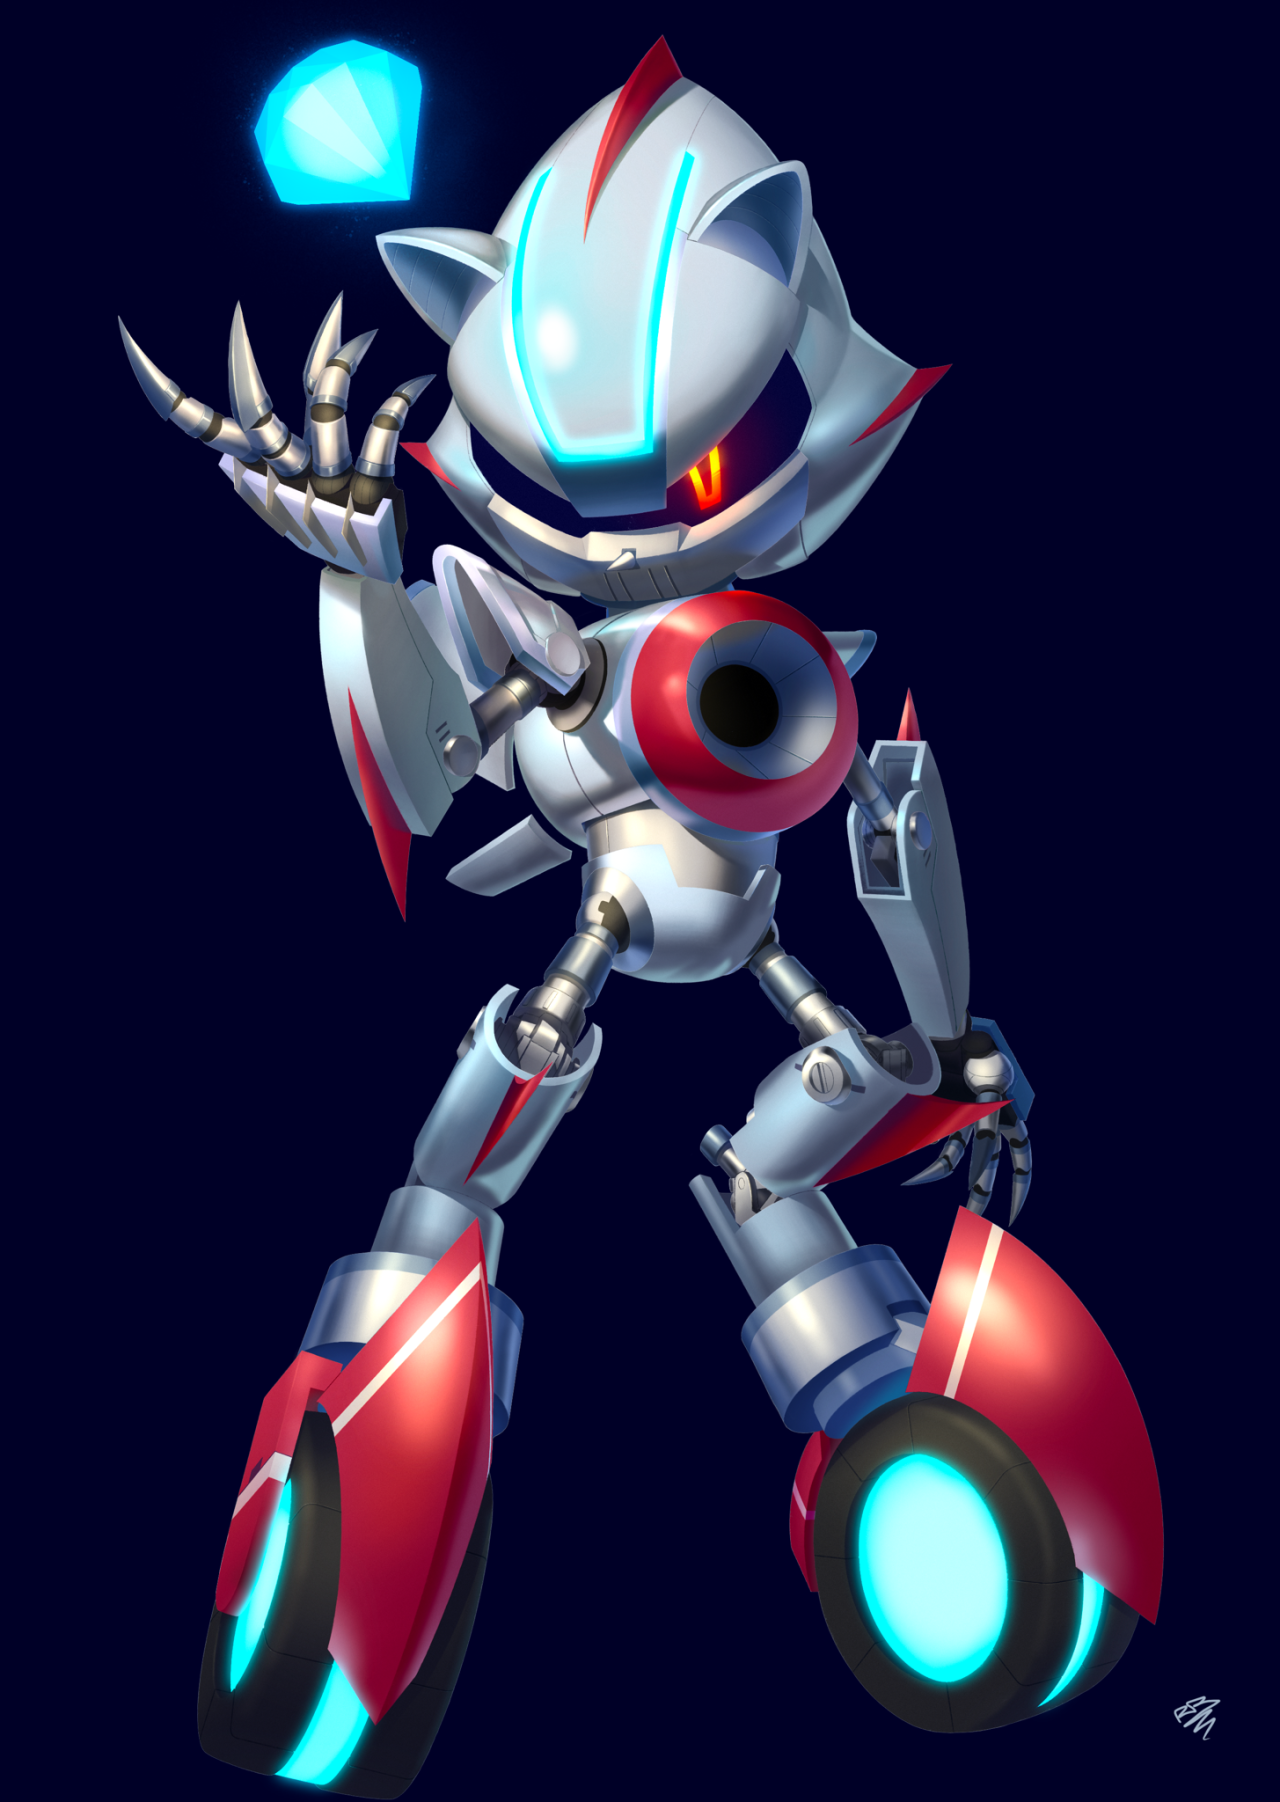 Metal Sonic and Rocket Metal in Sonic 3 Style